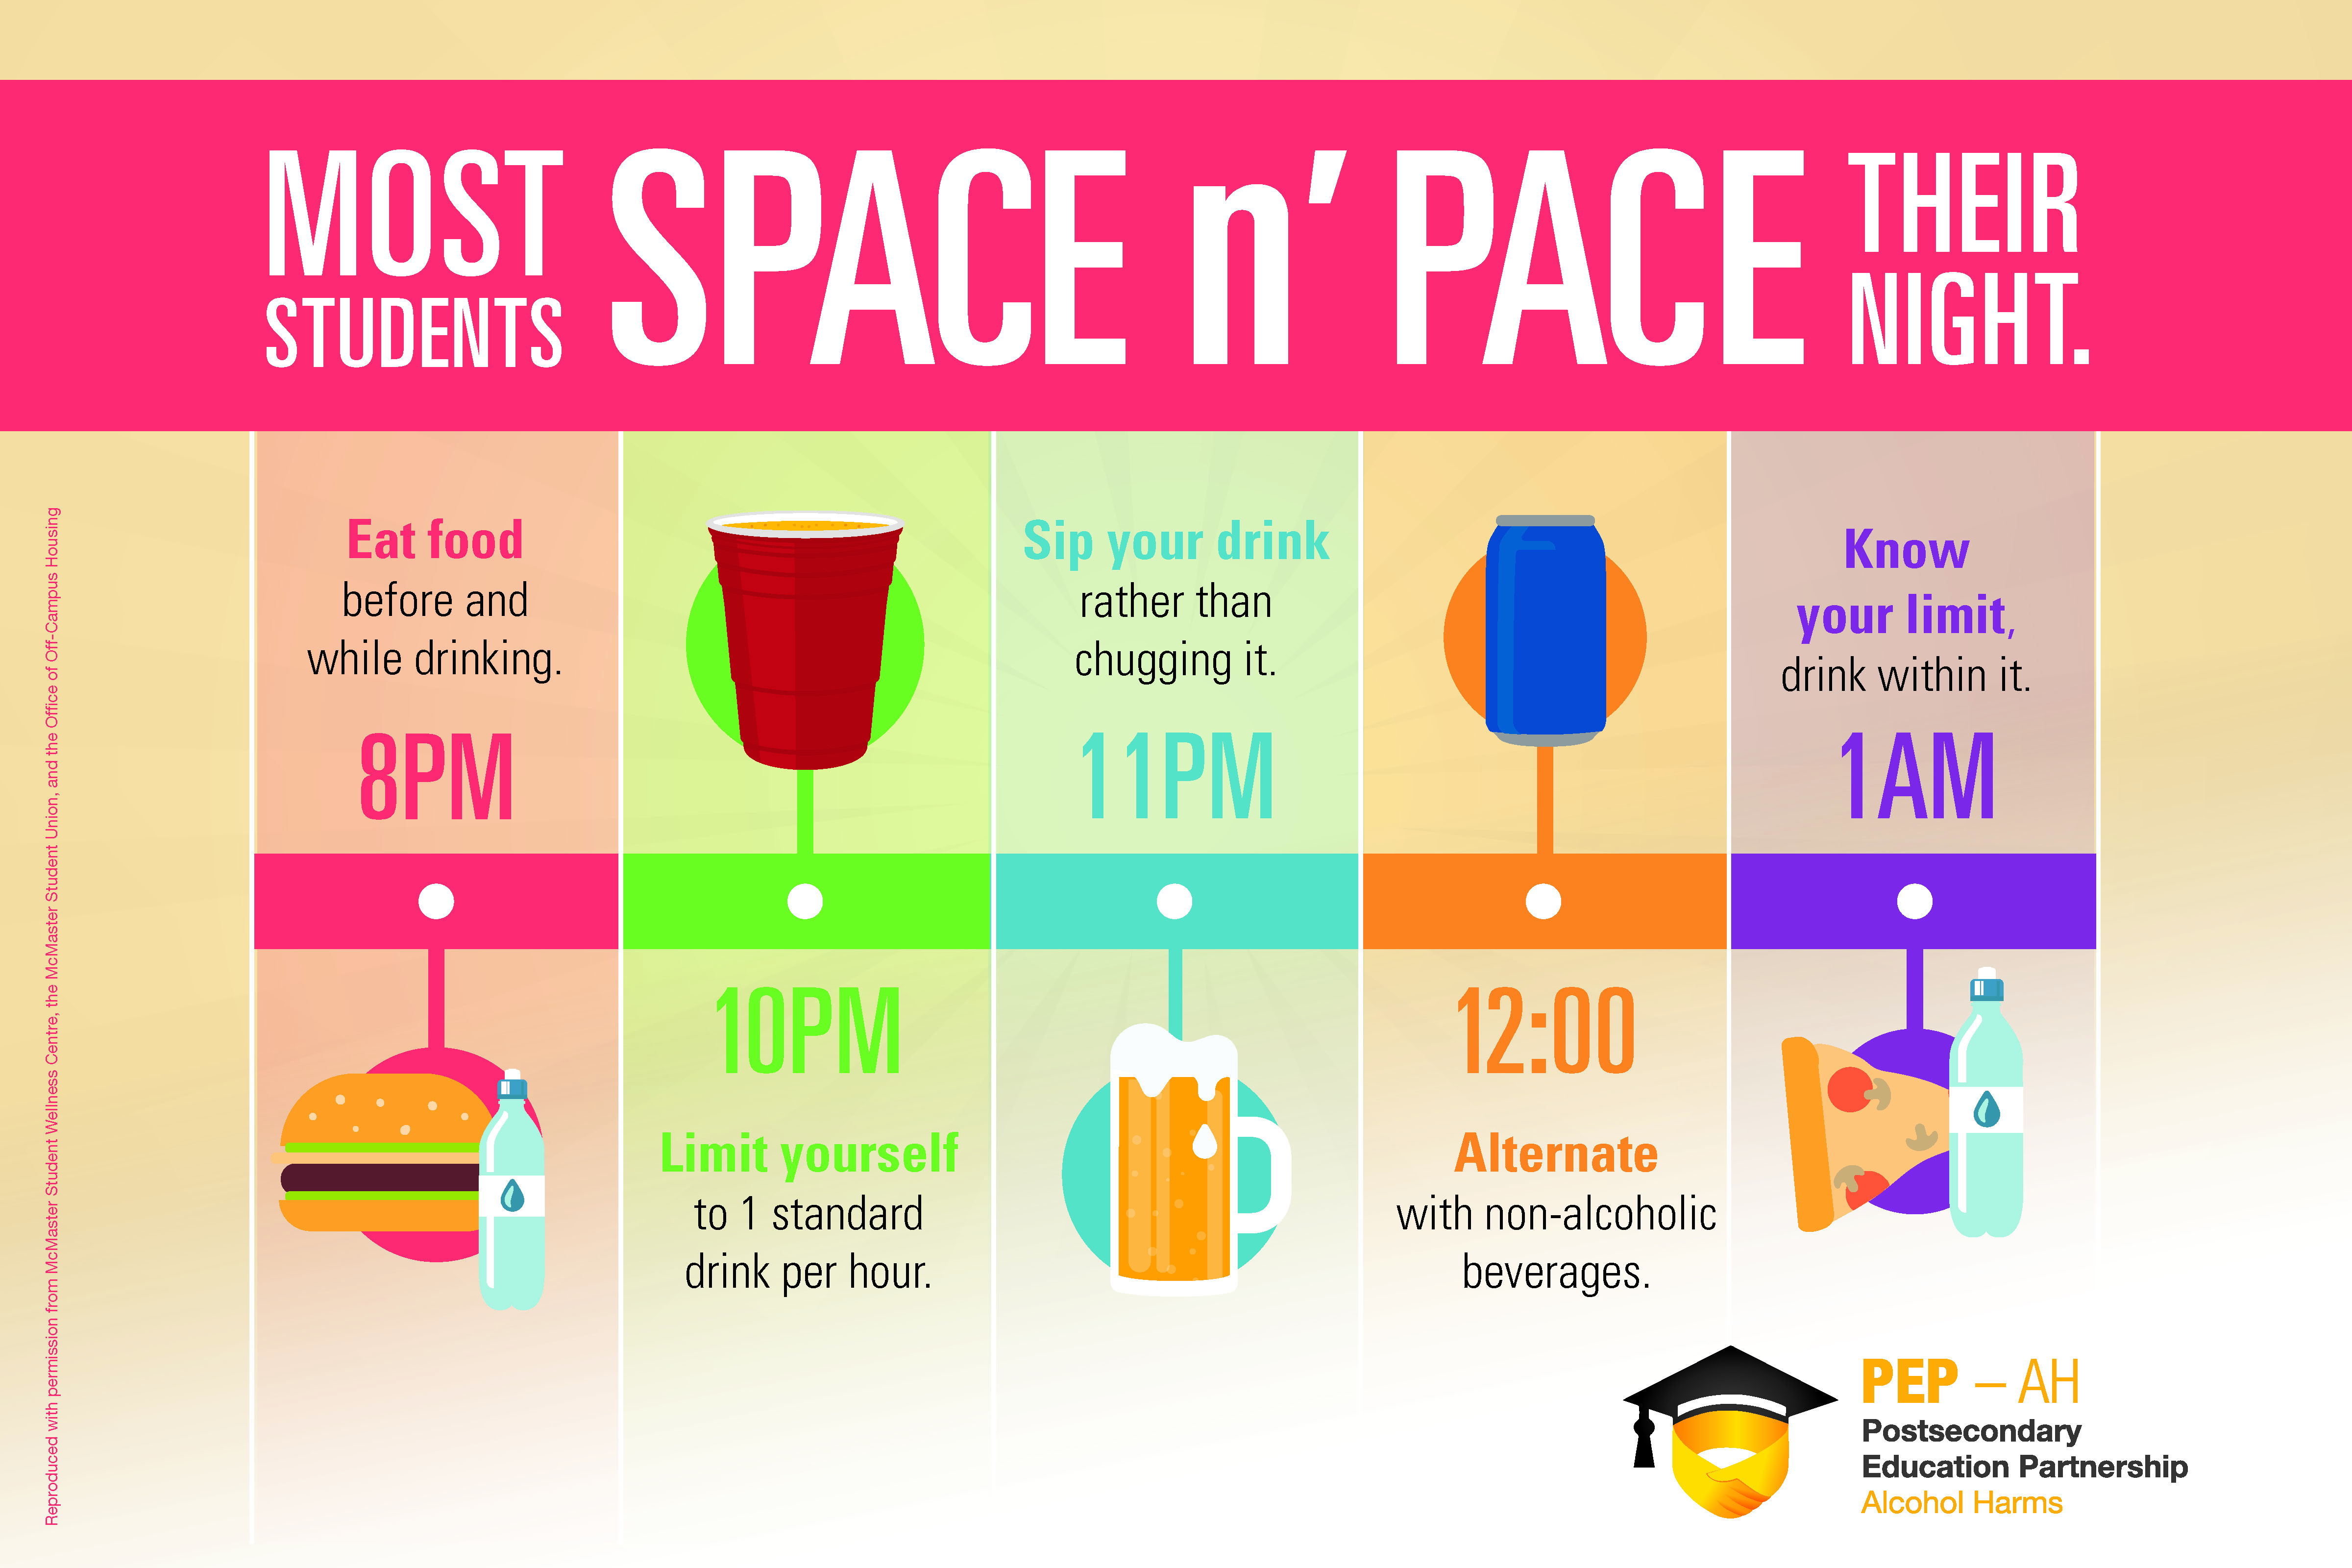 Most Students Space n' Pace Their Night